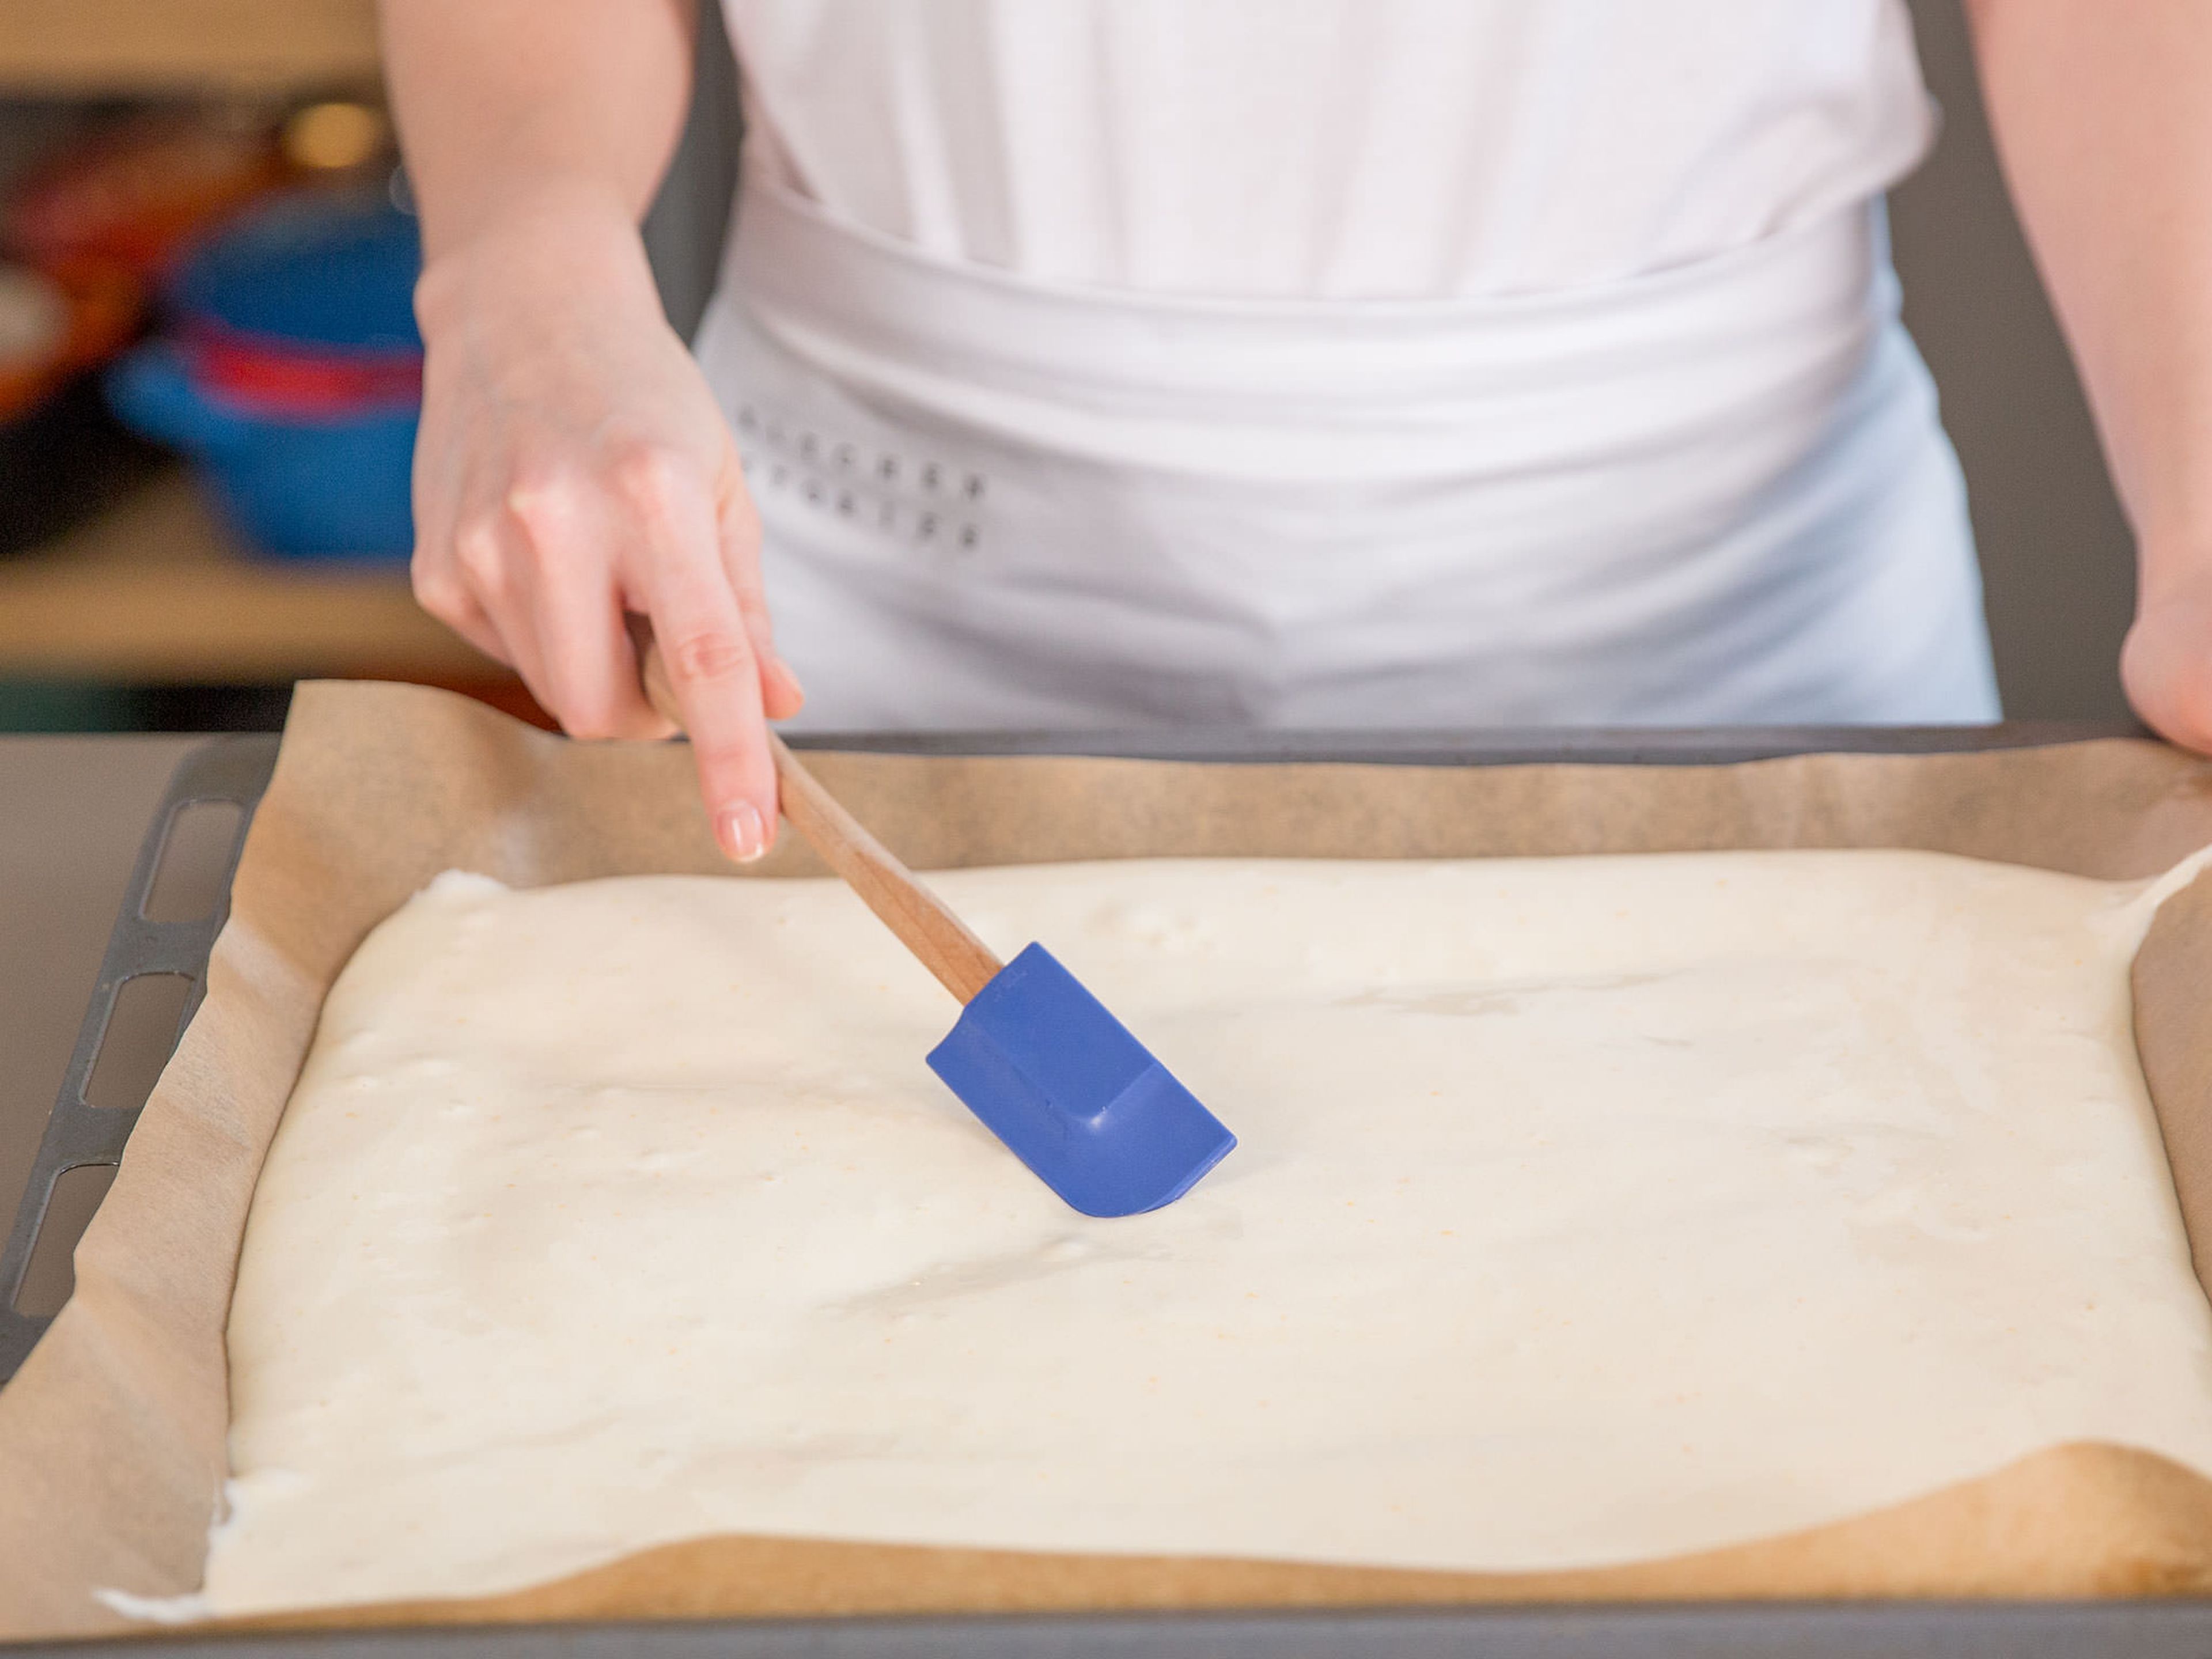 Pour batter onto a parchment-lined baking sheet, smooth out, place in preheated oven, and bake at 200°C/400°F for approx. 8 – 10 min. until golden. Remove from oven and set aside.